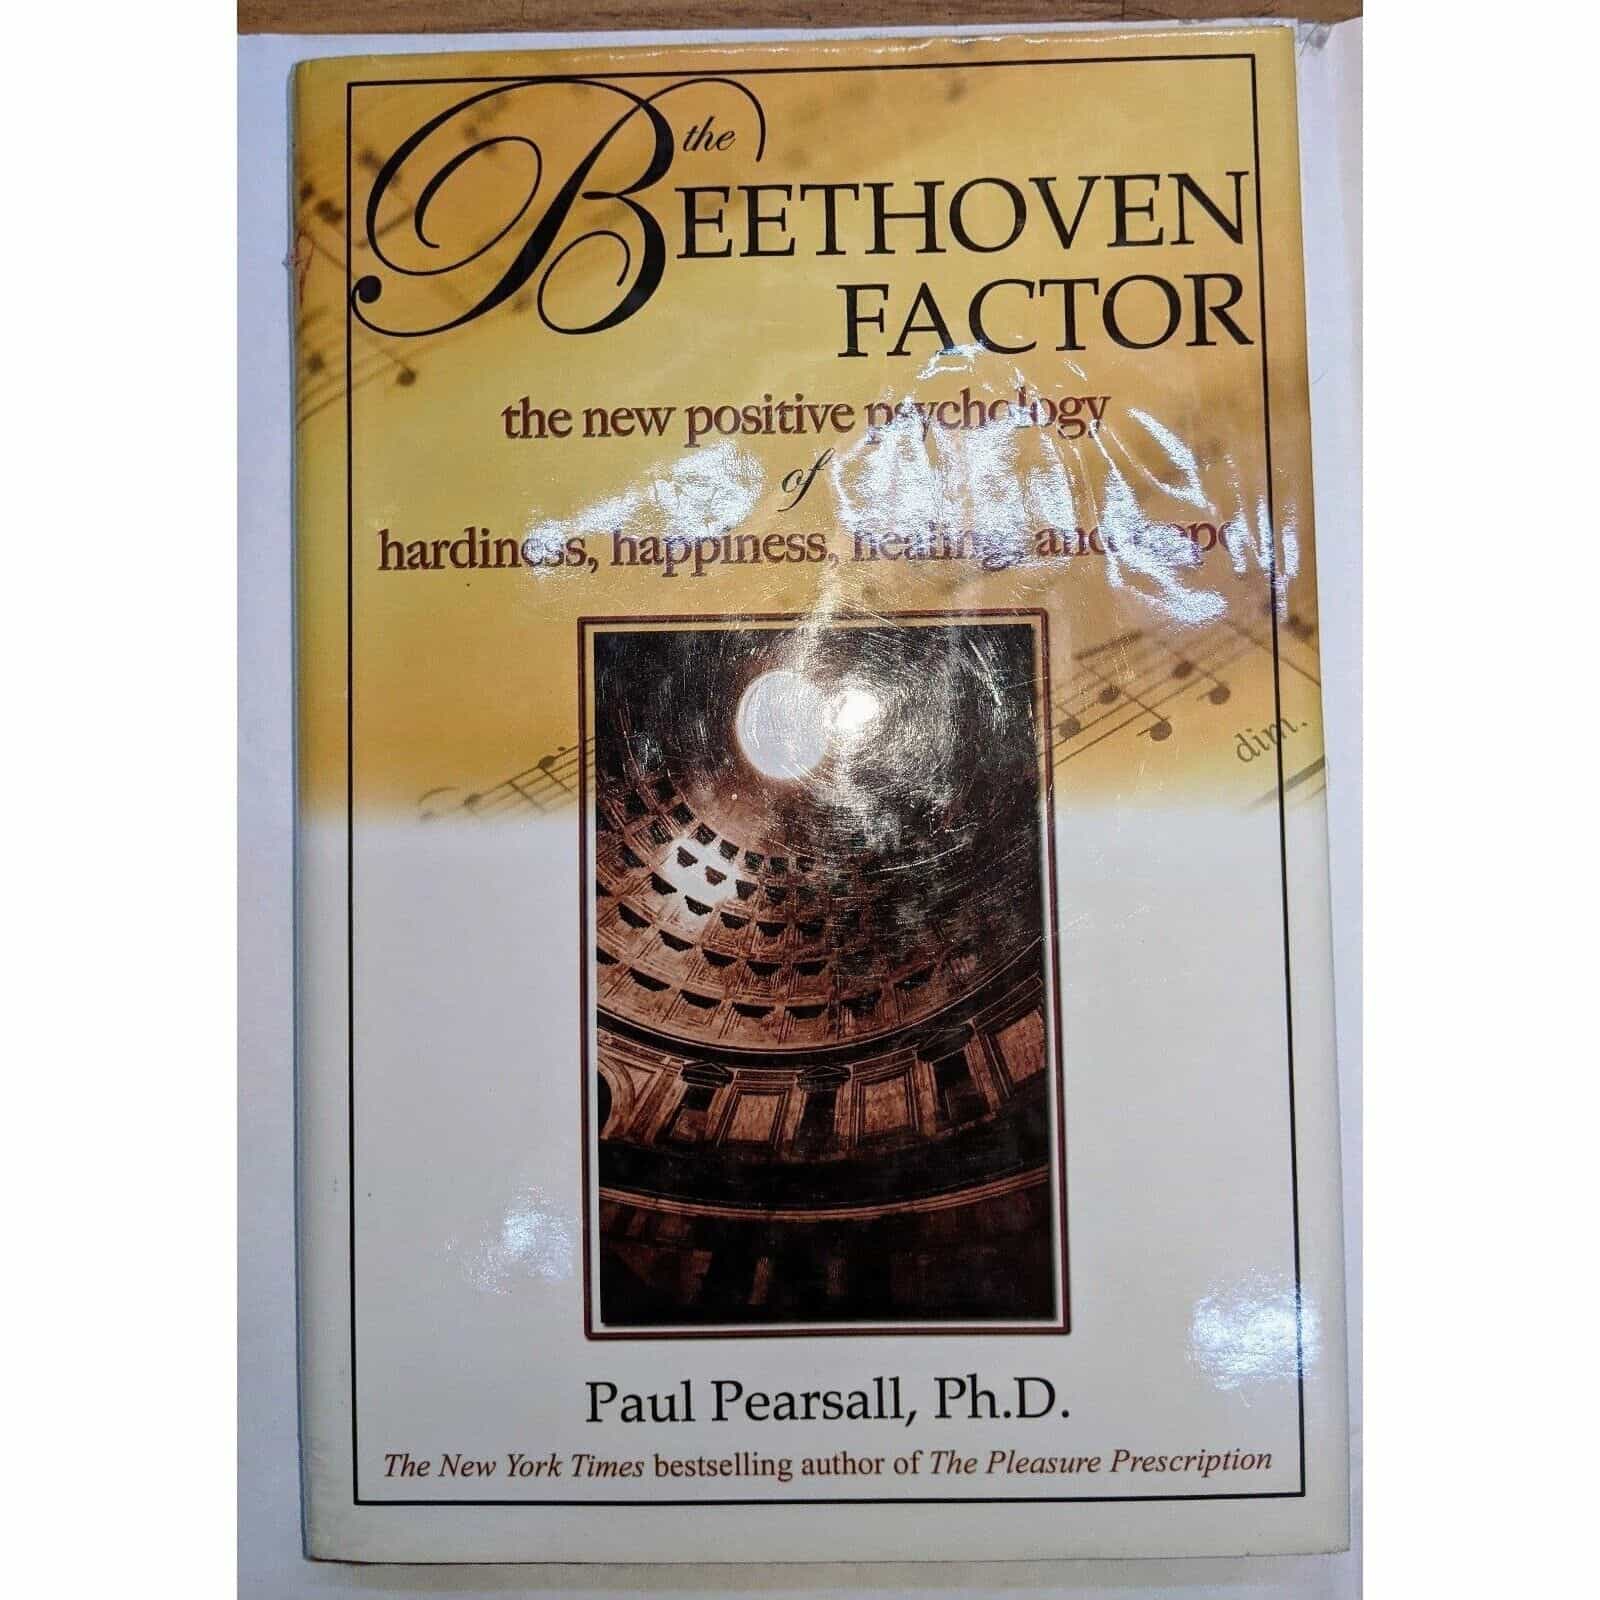 The Beethoven Factor by Paul Pearsall, Ph.D Book